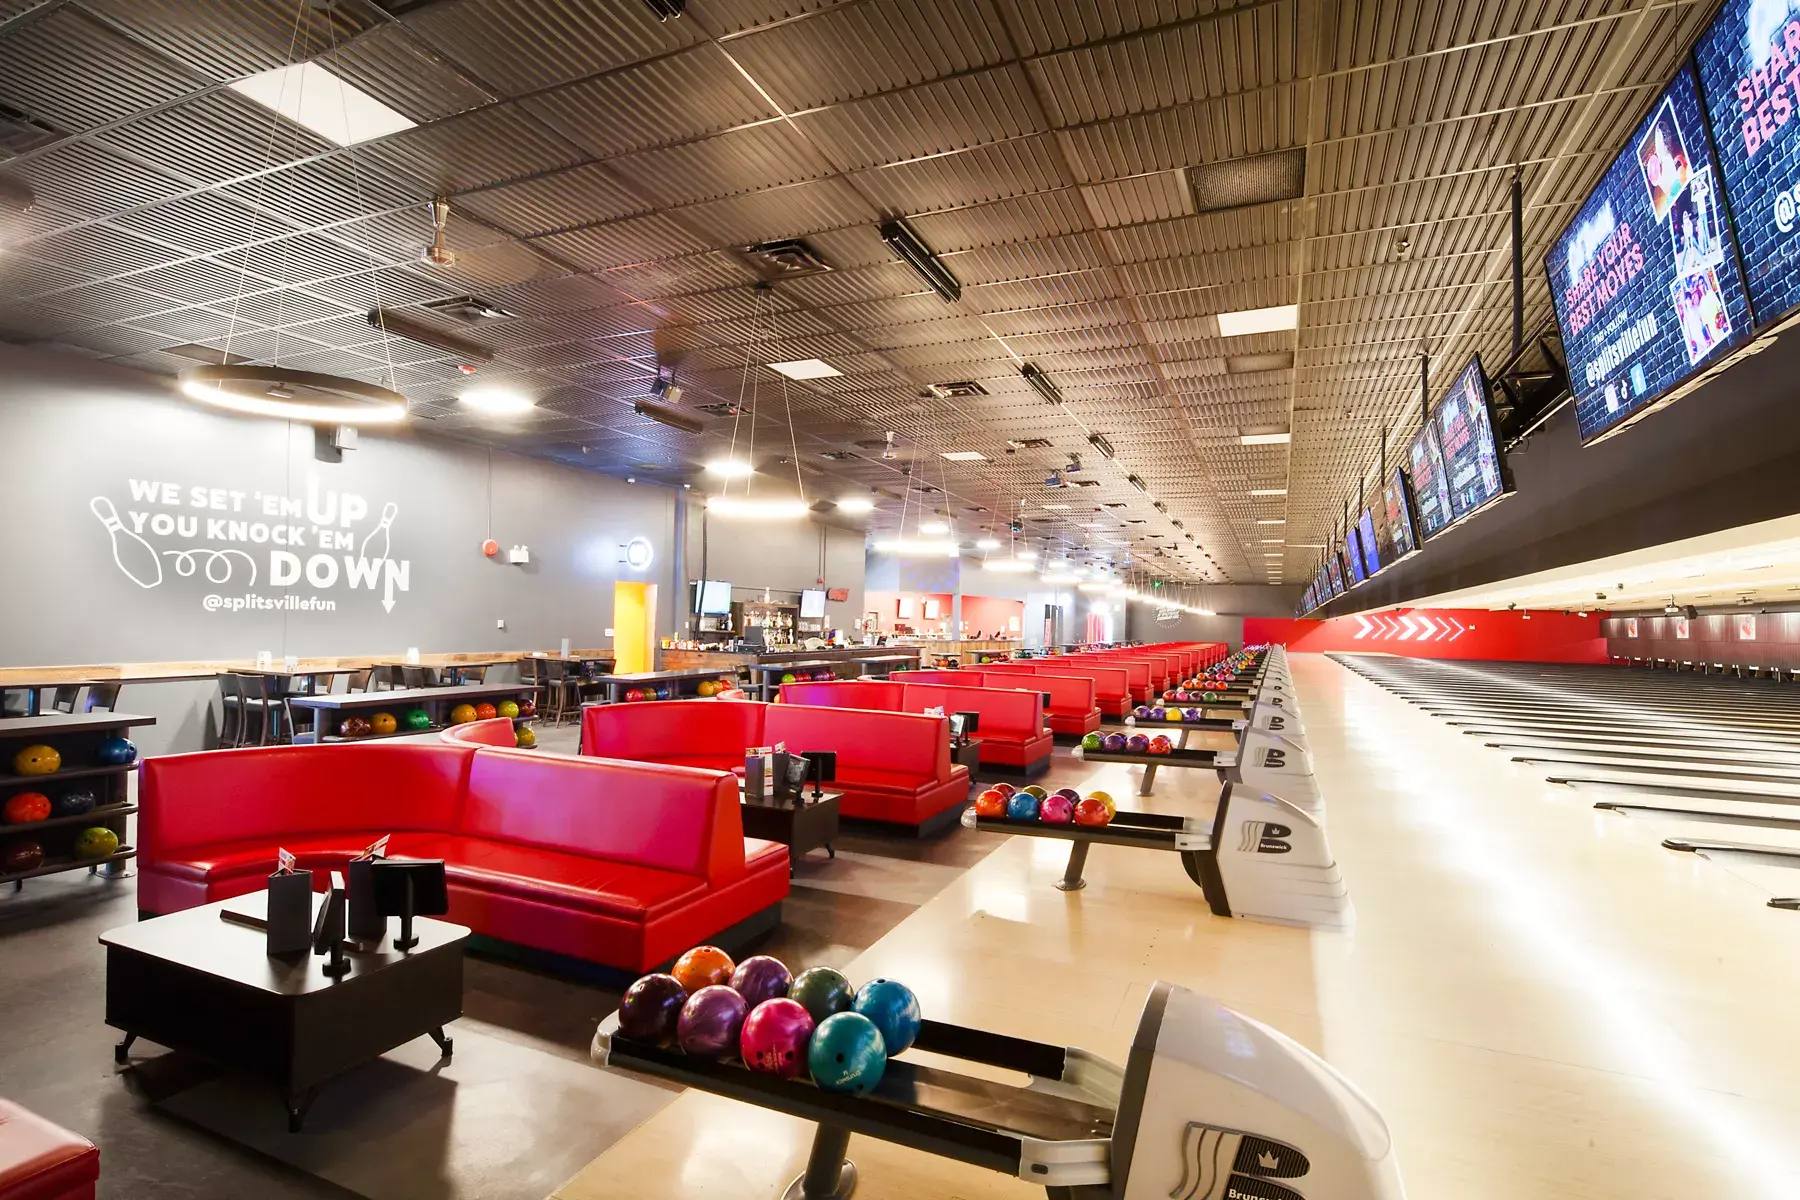 richmond hill's completed bowling area